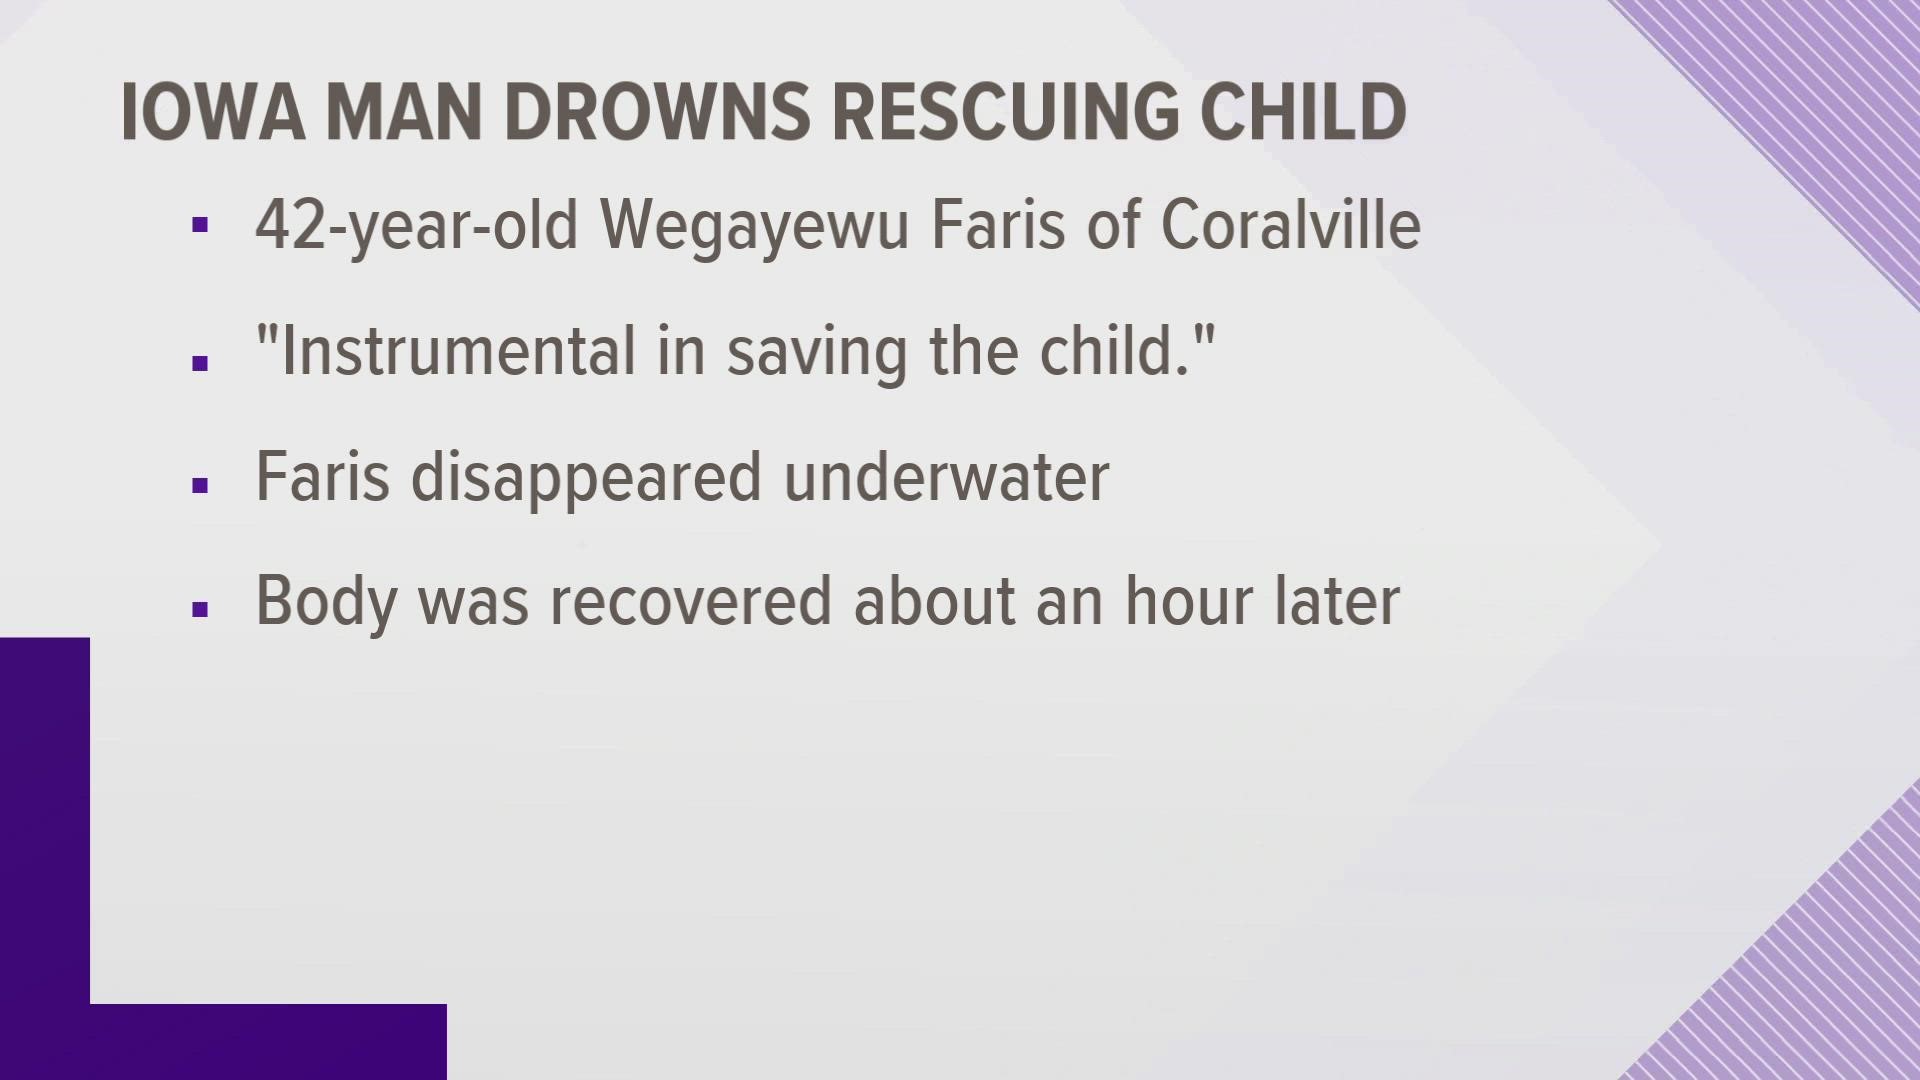 Wegayewu Faris, 42, drowned in the Iowa River on Friday while helping rescue an 8-year-old from the water.